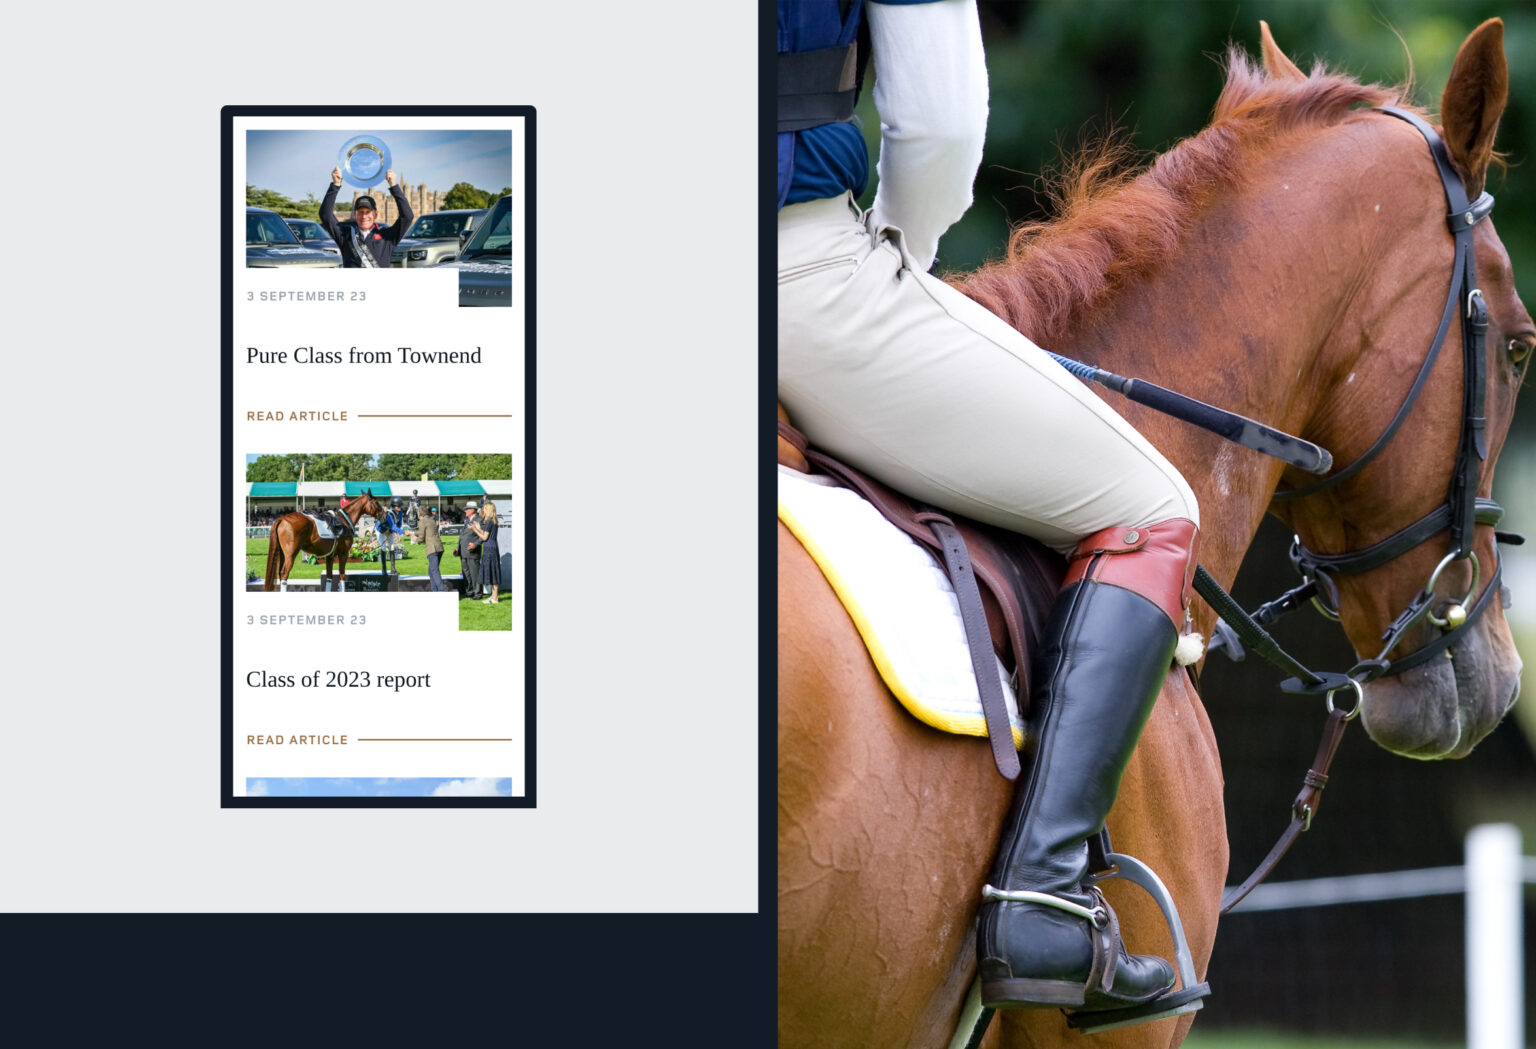 07 Burghley Horse Trials news articles on phone